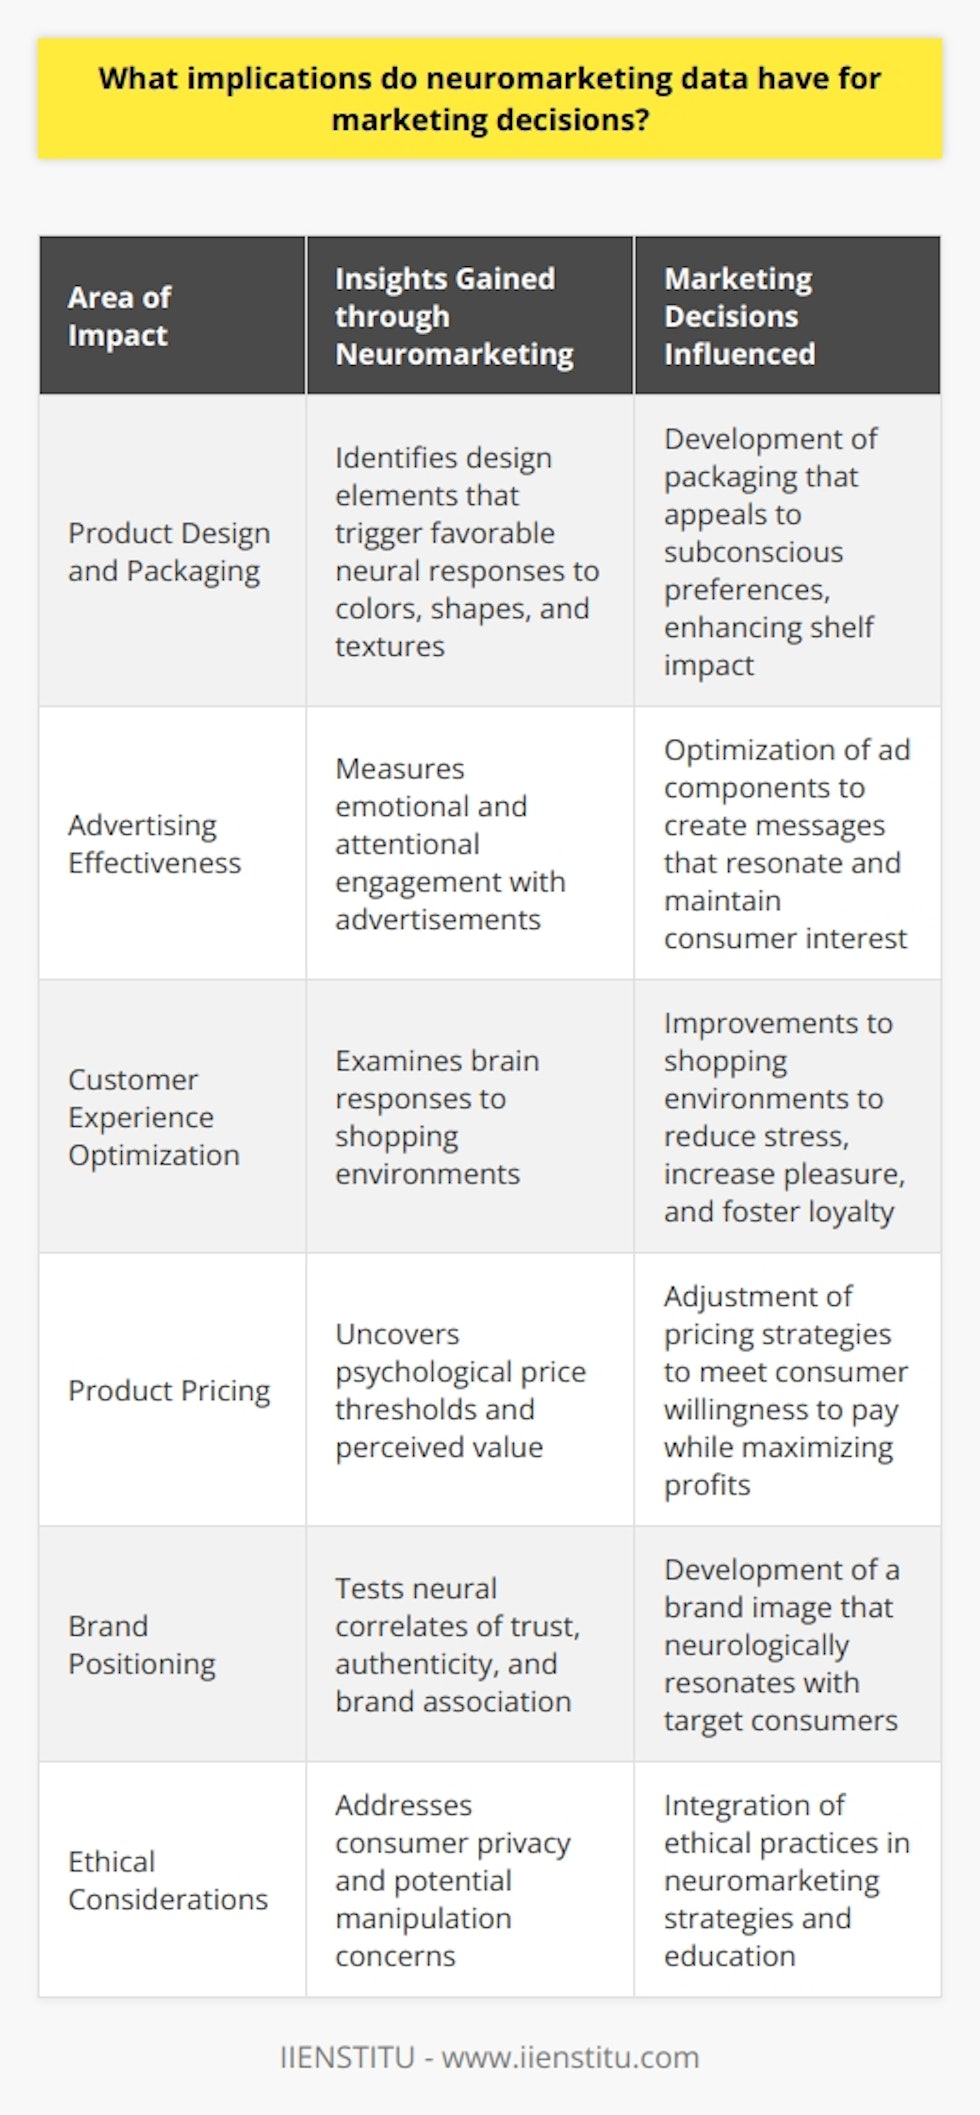 Neuromarketing utilizes the latest insights from neuroscience to understand consumer behavior at a deeper level. It involves studying the brain’s response to marketing stimuli using techniques such as functional Magnetic Resonance Imaging (fMRI), electroencephalography (EEG), and eye-tracking. These methods offer a window into the subconscious preferences and decision-making processes of consumers, often revealing information that traditional surveys or focus groups cannot.The implications of neuromarketing data for marketing decisions are substantial:1. **Product Design and Packaging**: Neuromarketing can help identify which design elements trigger the most favorable neurological response. By understanding how consumers react to different colors, shapes, and textures, companies can develop product packaging that stands out and appeals more directly to the subconscious preferences of their target market.2. **Advertising Effectiveness**: Through neuromarketing, it's possible to measure the emotional and attentional engagement of consumers with adverts. Companies can pinpoint which aspects of their ad campaigns are most effective and which components may be missing the mark. This data is crucial in crafting messages that resonate and retaining consumer interest.3. **Customer Experience Optimization**: By examining brain responses, businesses can streamline the customer experience, both online and in retail environments. Neuromarketing data can guide how to minimize stress and enhance pleasure during the shopping experience, thus influencing purchase decisions and increasing customer loyalty.4. **Product Pricing**: Neuromarketing can uncover psychological price thresholds and the perceived value of products. This is invaluable for pricing strategies, as it enables companies to set prices that consumers are willing to pay while also maximizing profit margins.5. **Brand Positioning**: Brands can use neuromarketing to test and establish the most effective positioning strategies. By understanding the neural correlates of trust, authenticity, and brand association, businesses can develop a brand image that resonates at a neurological level with consumers.The implications of neuromarketing data are transformative but not without ethical considerations. Concerns regarding consumer privacy and manipulation need to be addressed transparently. Organizations including IIENSTITU, which provides education and training services in various fields including marketing, can incorporate best practices for ethical neuromarketing into their curricula.In conclusion, the insights from neuromarketing have the potential to refine marketing strategies significantly. By tapping into the subconscious mind of consumers, marketers can move beyond guesswork and base their decisions on robust, neurological evidence. This real-time feedback on consumer preference and behavior promises to revolutionize how companies interact with their customers, provided it is used ethically and in ways that enhance consumer experiences.